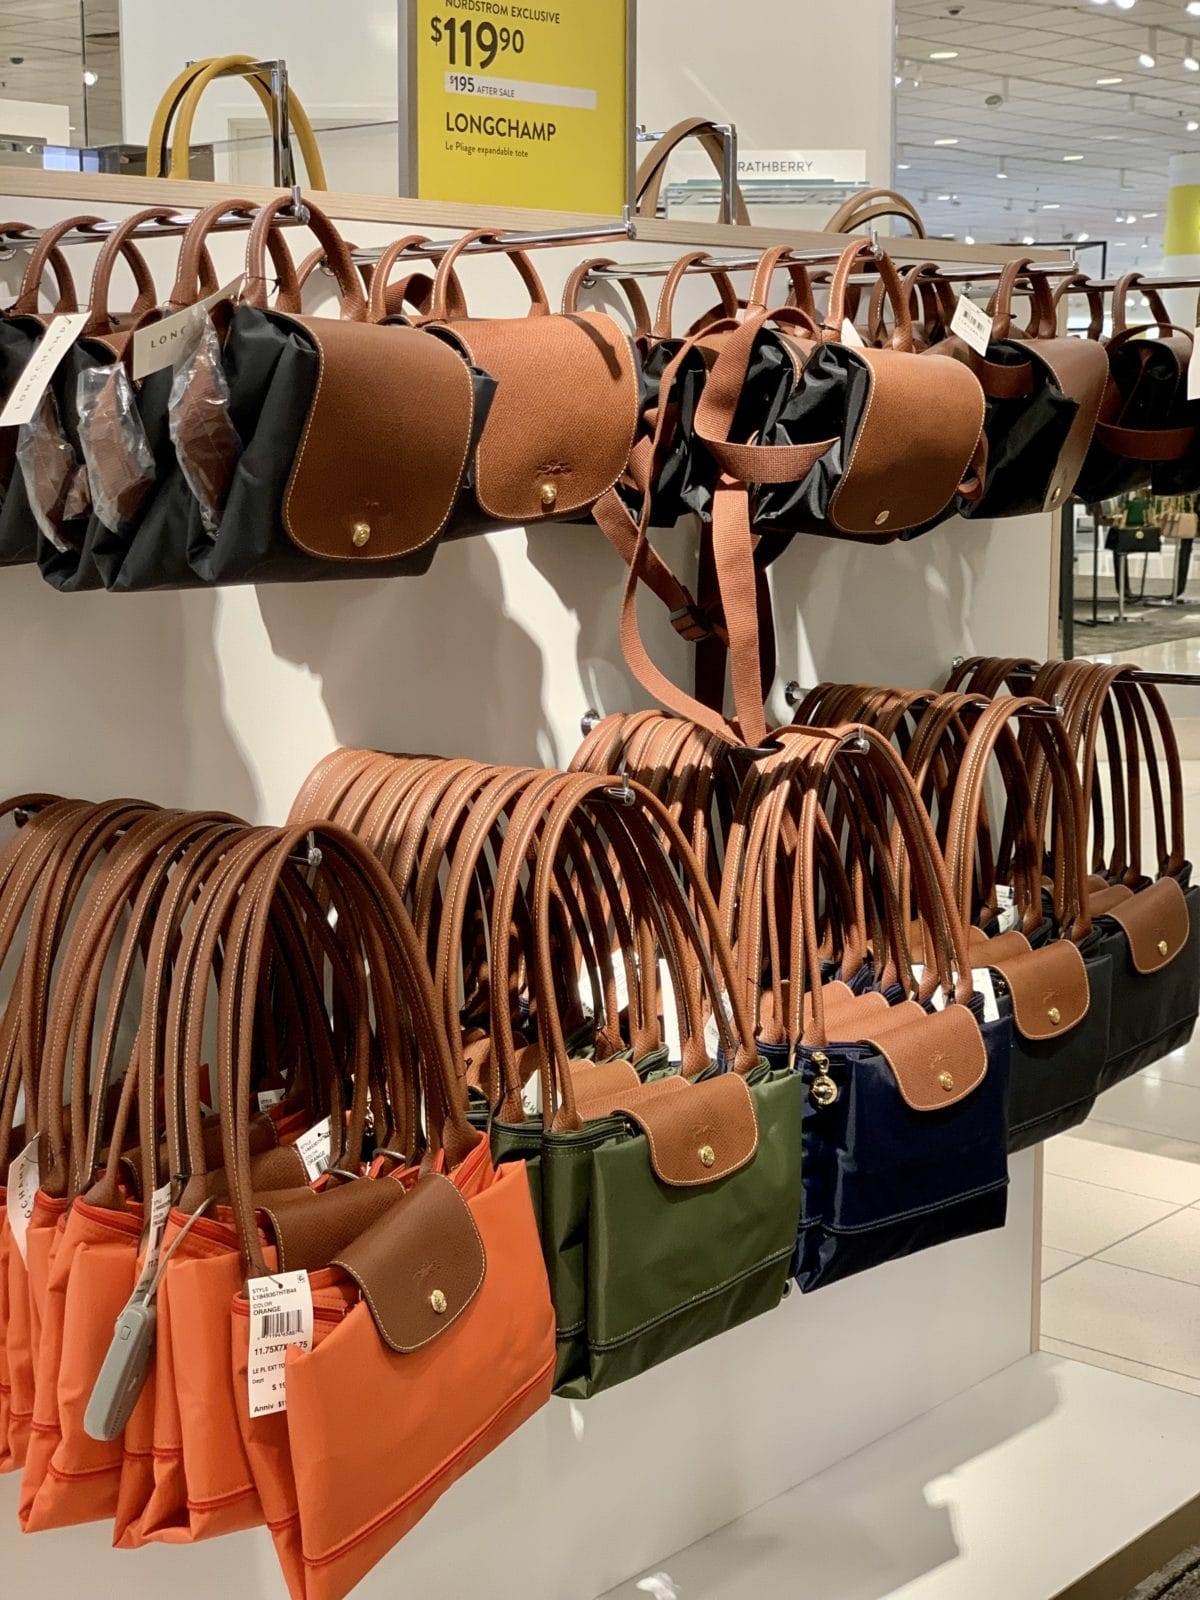 Nordstrom Anniversary Sale 2021: Get a Longchamp bag for a great price